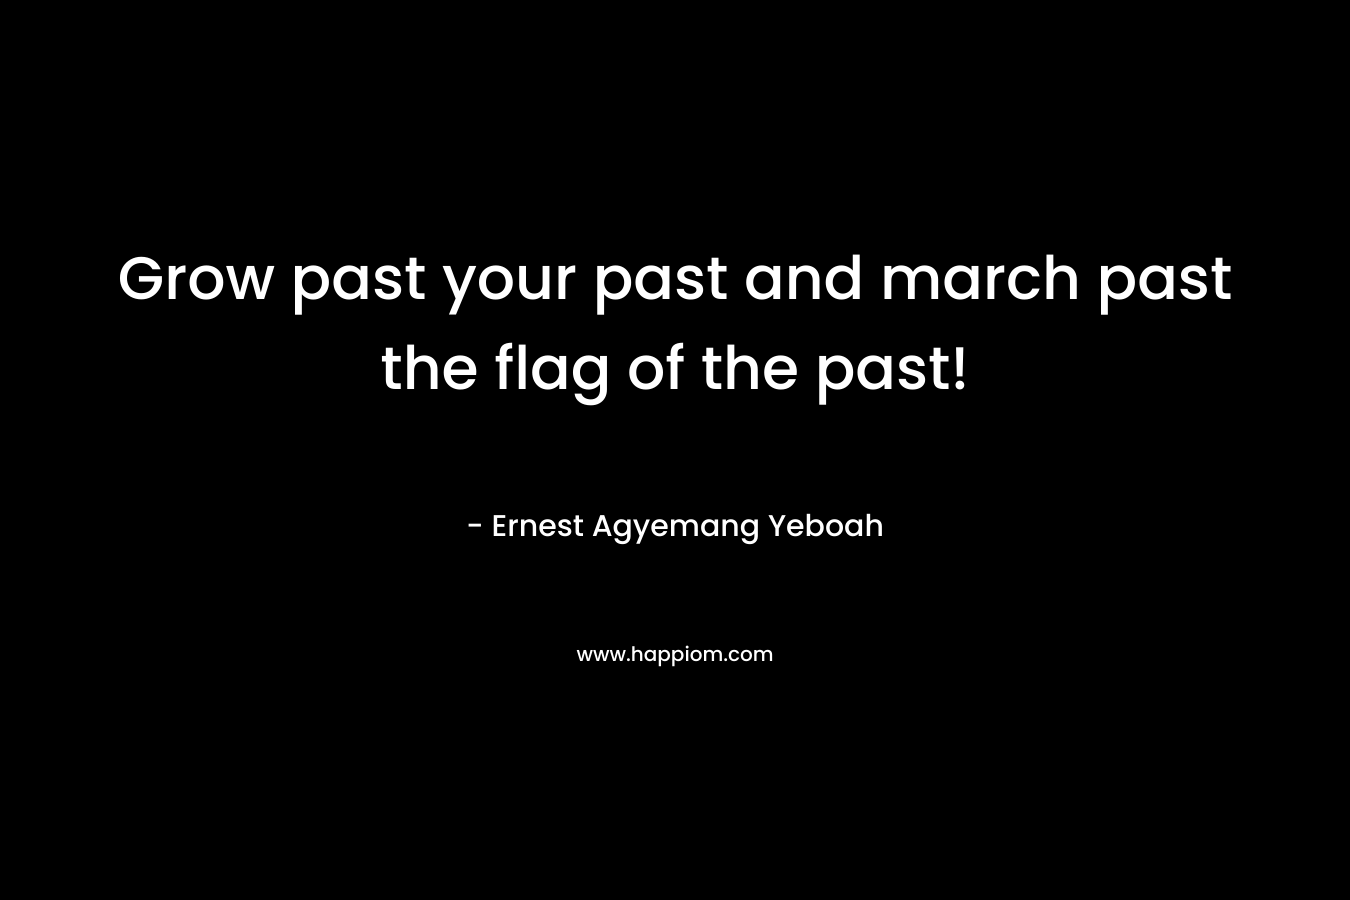 Grow past your past and march past the flag of the past!